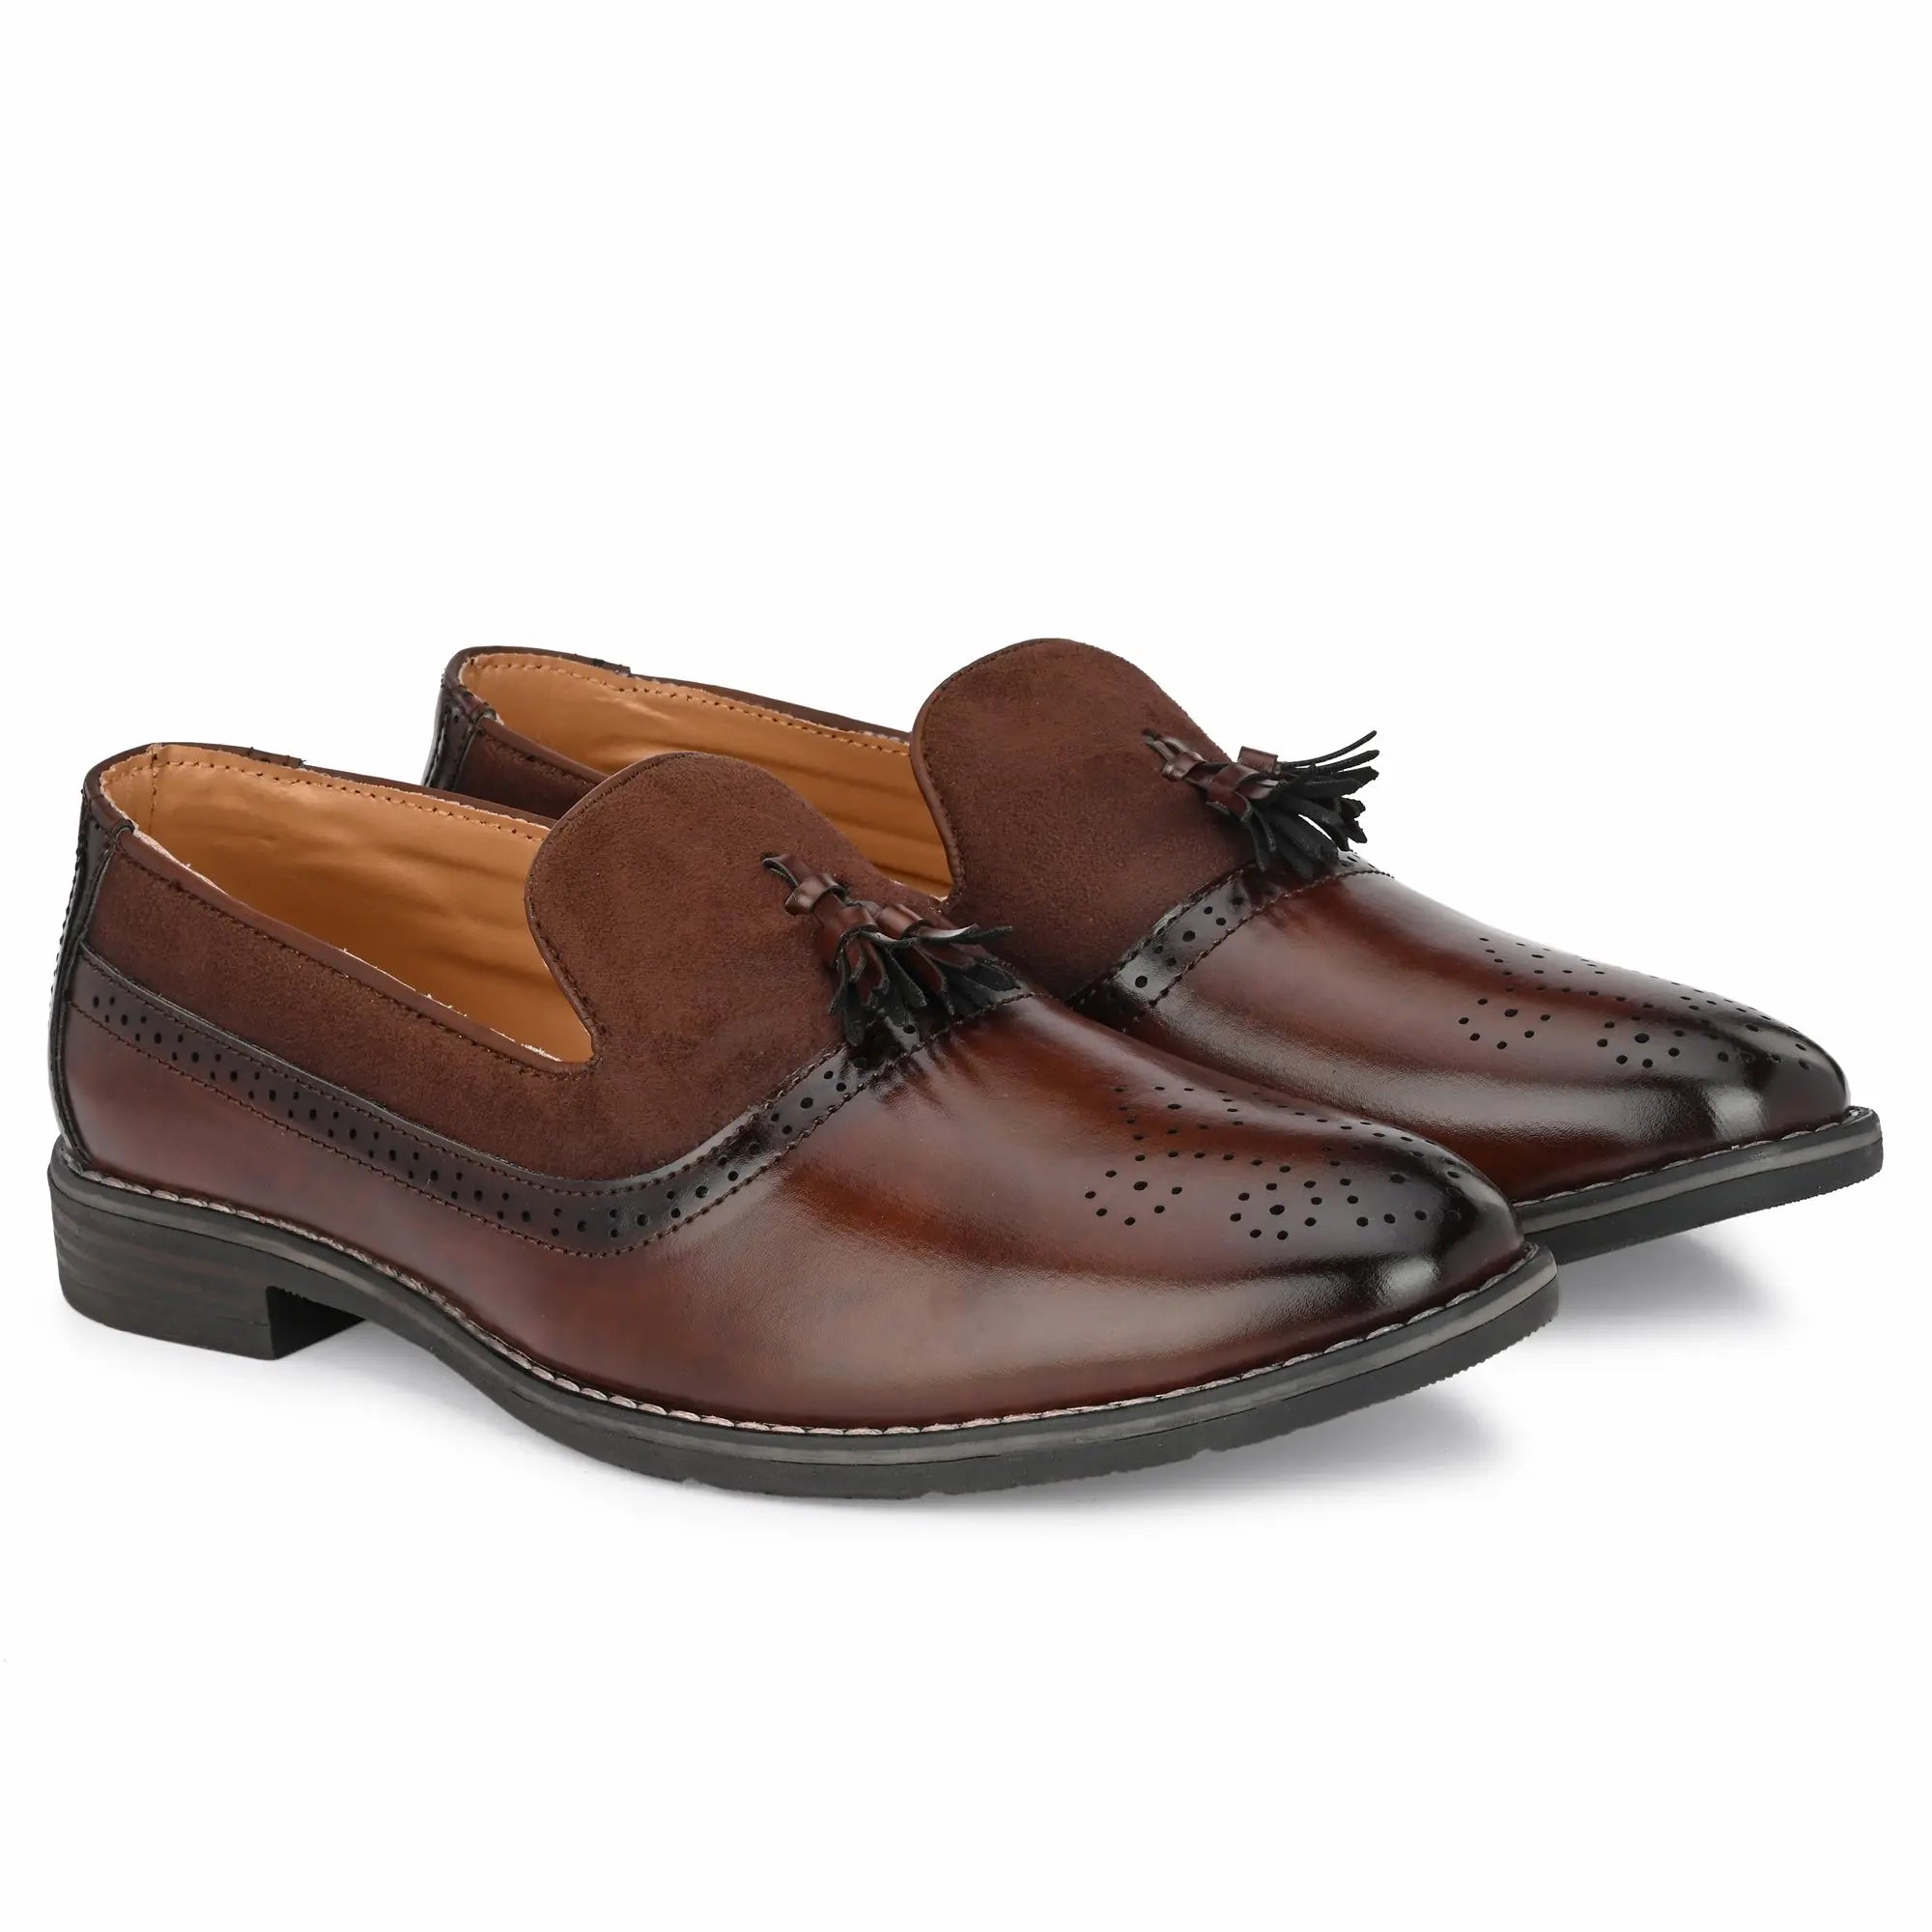 brown-loafers-attitudist-shoes-for-men-with-tassel-sp3b